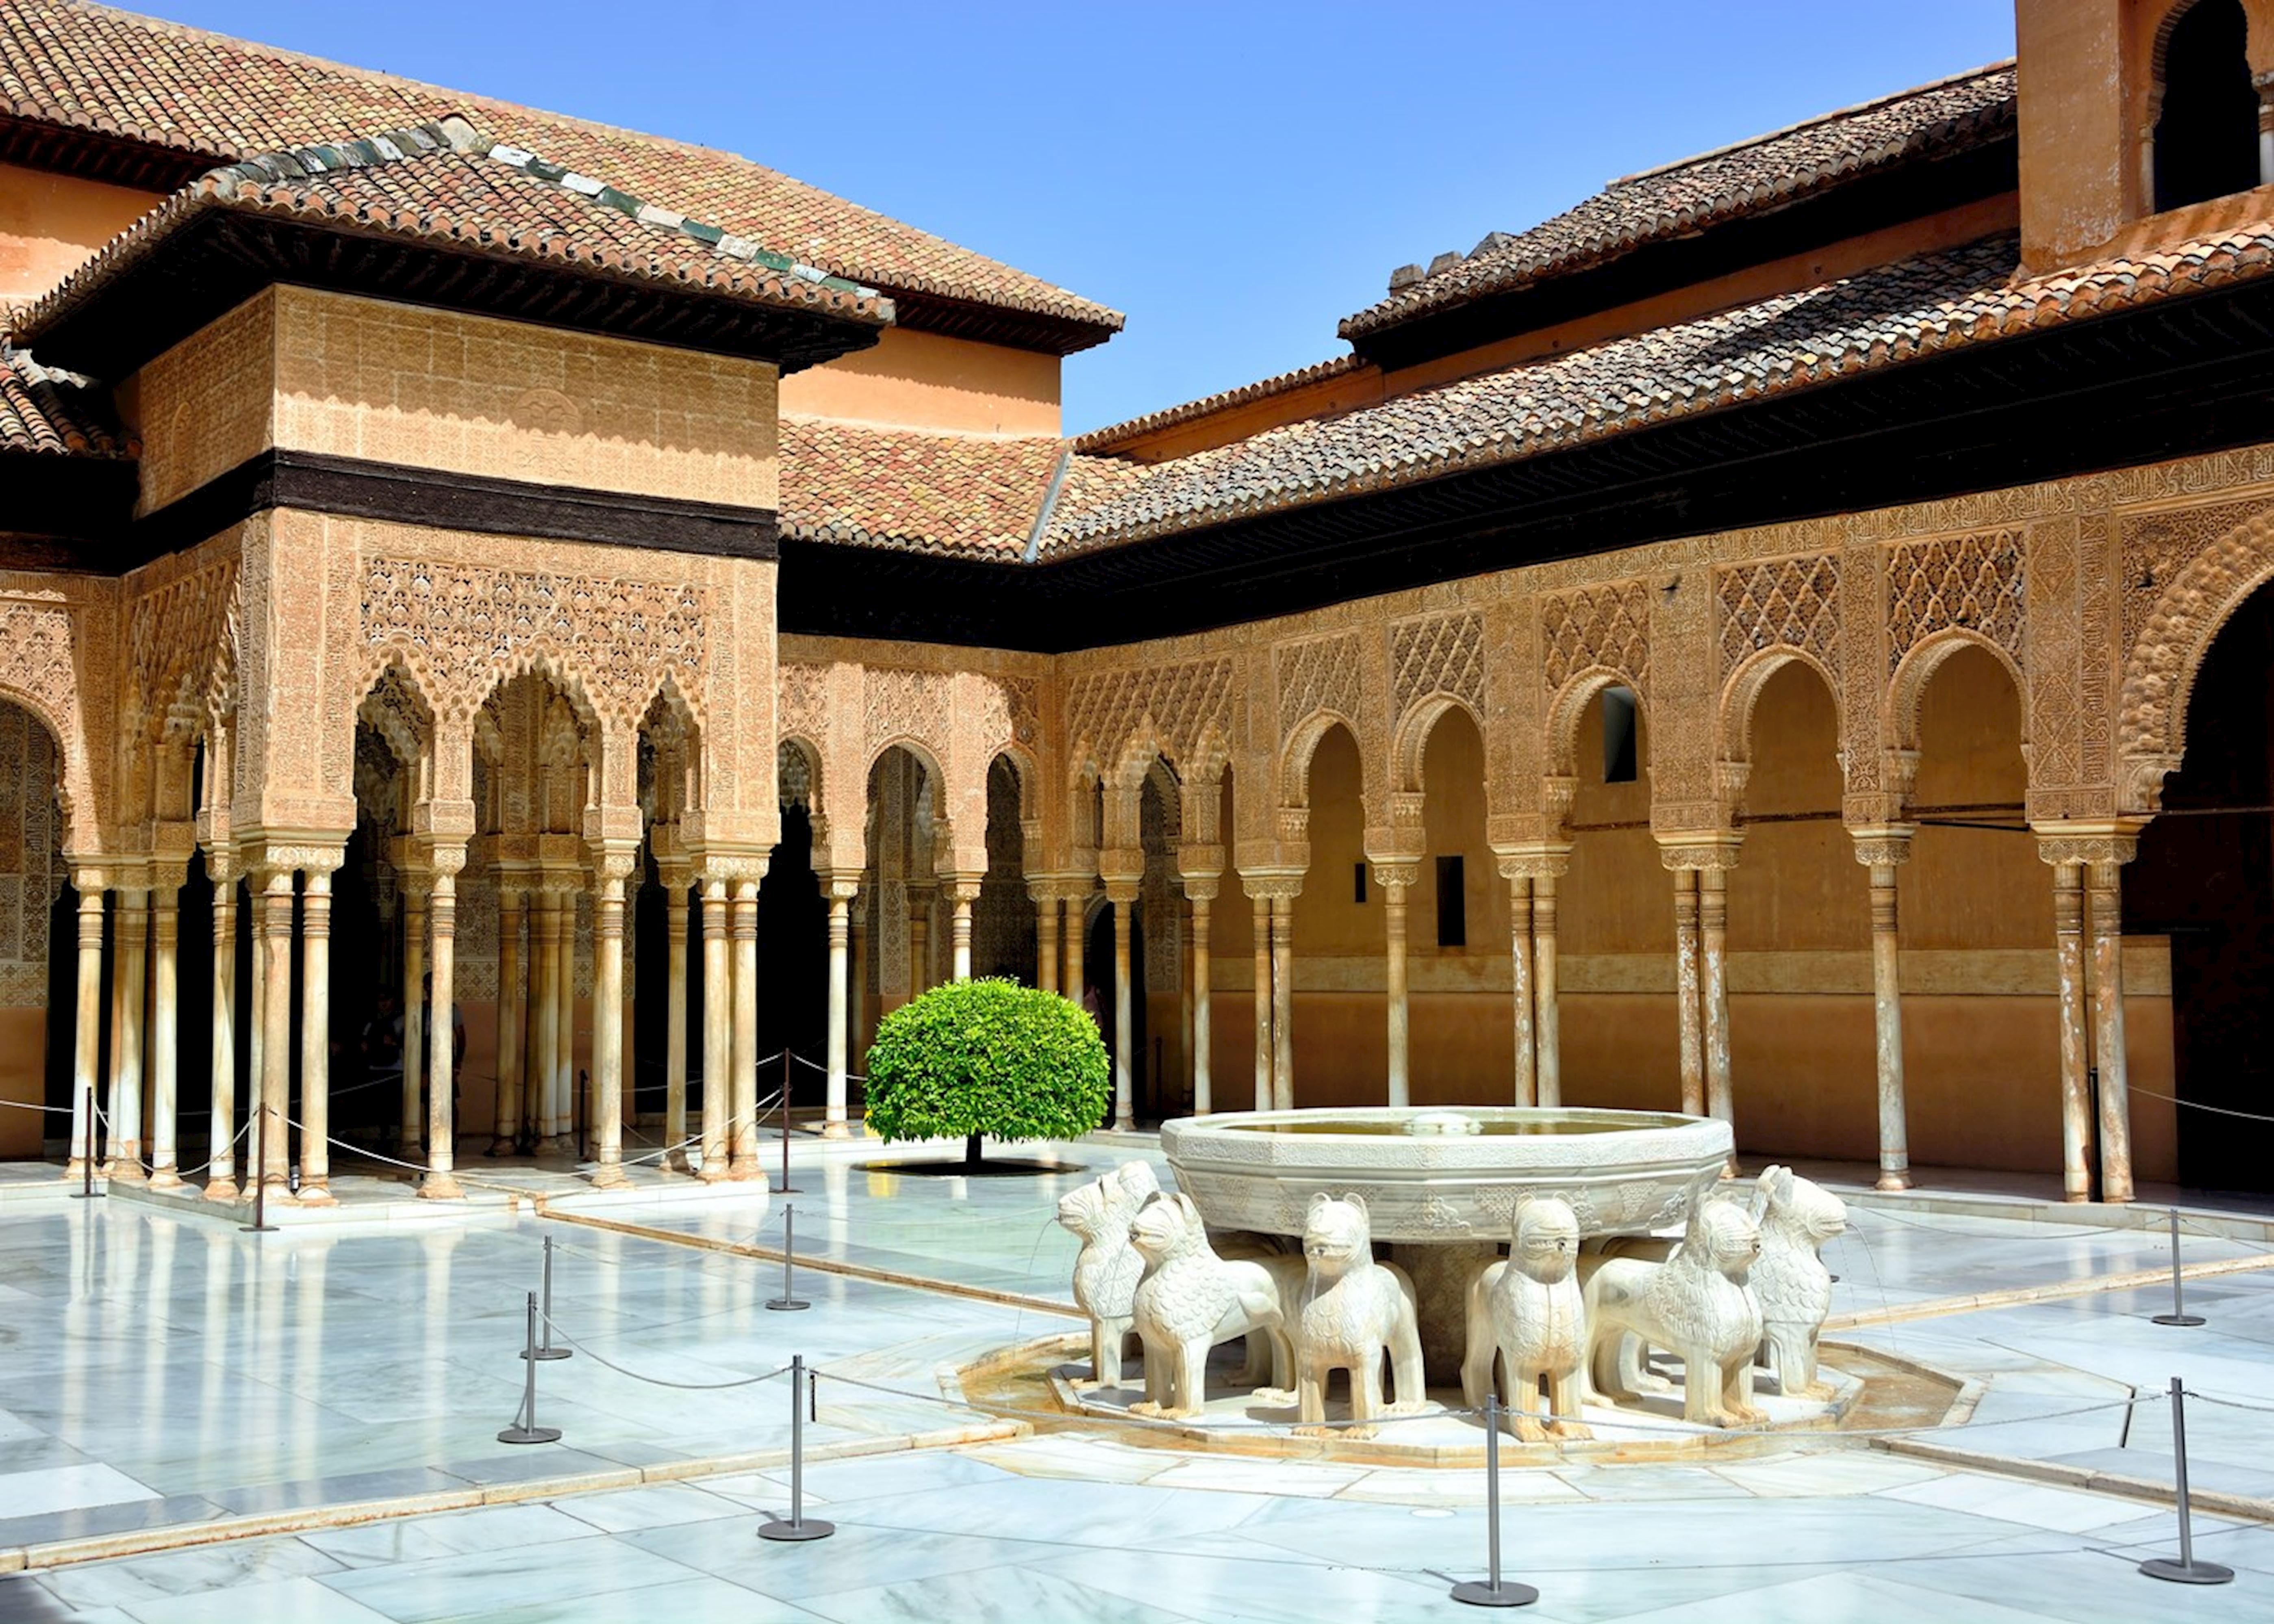 Alhambra Palace and Granada city tour | Audley Travel